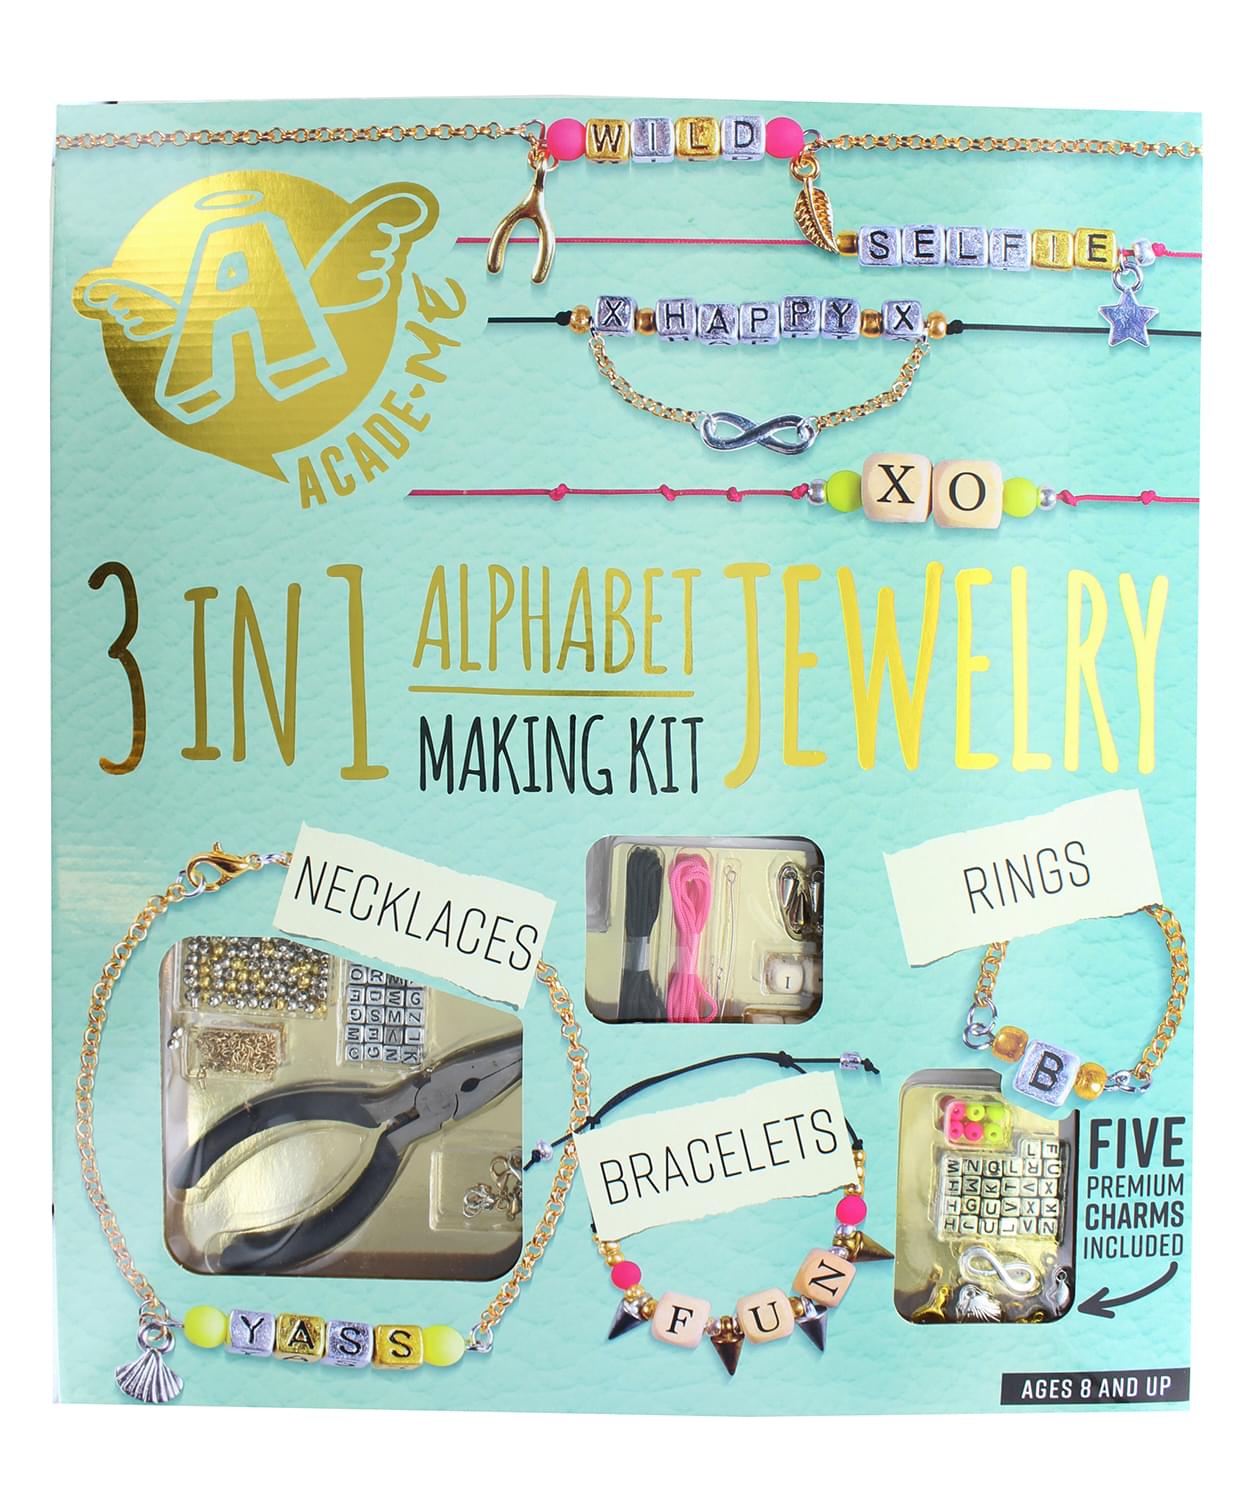 3 In 1 Alphabet Jewelry Making Kit | Includes 5 Premium Charms